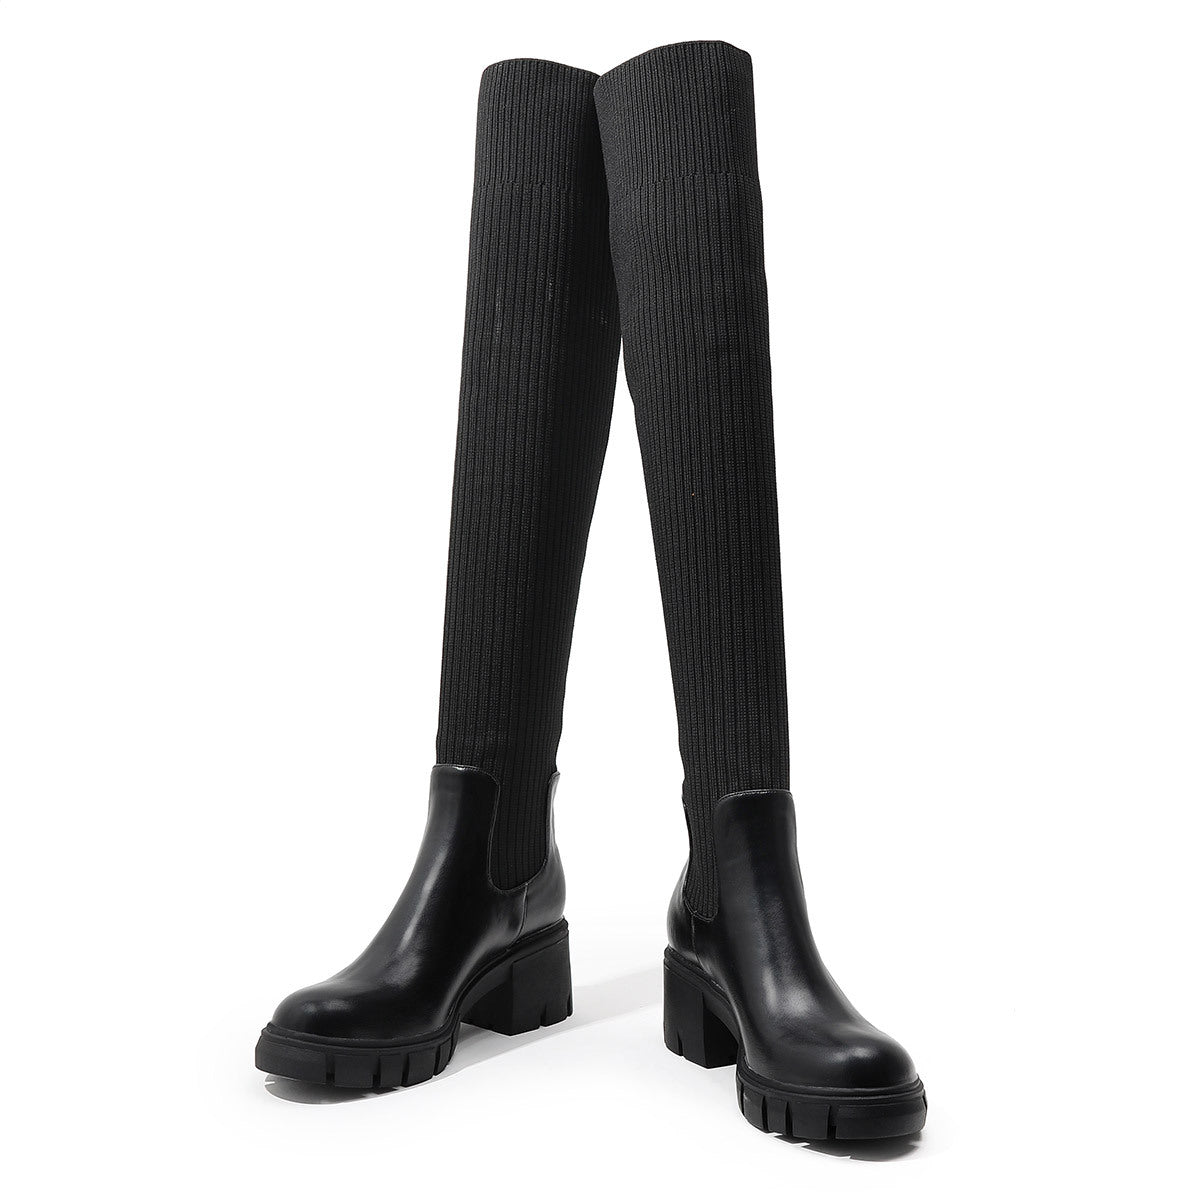 Martin Boots British Style Thick-Heeled Thick-Soled Boots Wool Elastic Over-The-Knee Women's Boots